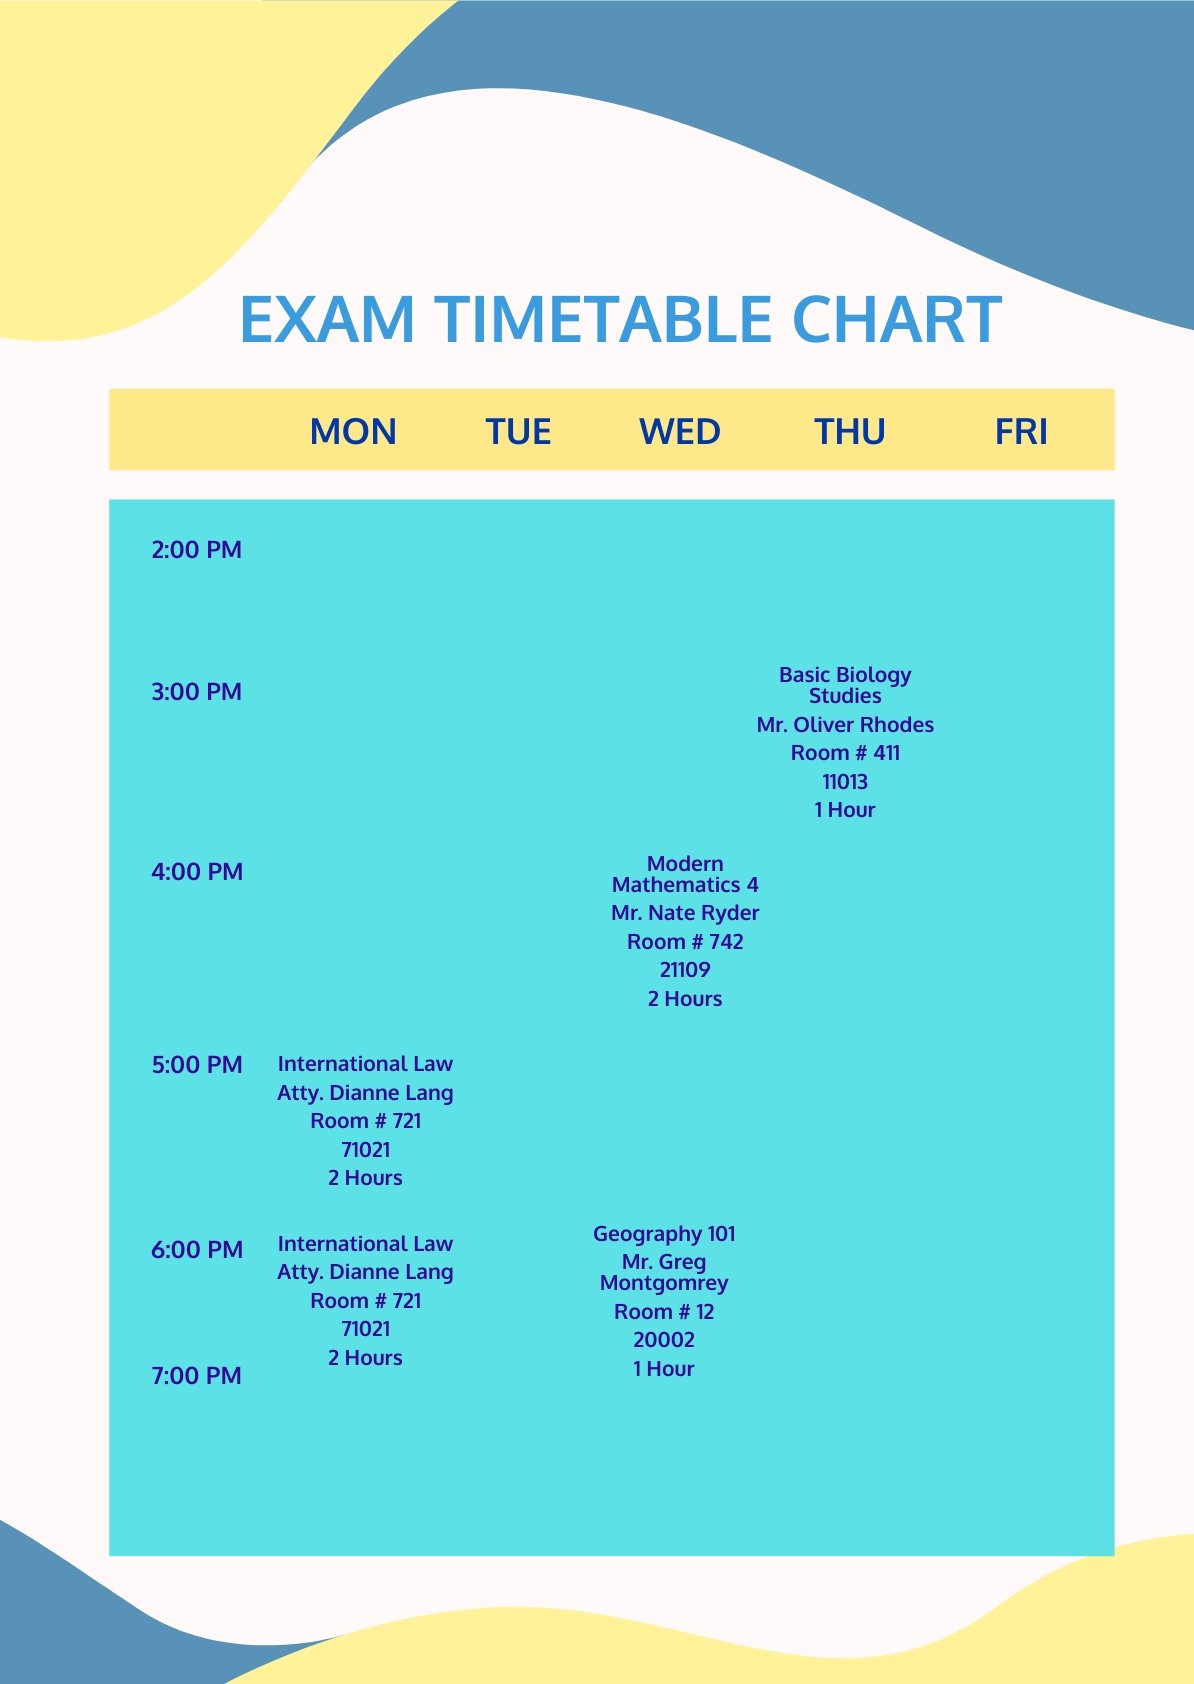 Exam Timetable Chart Template